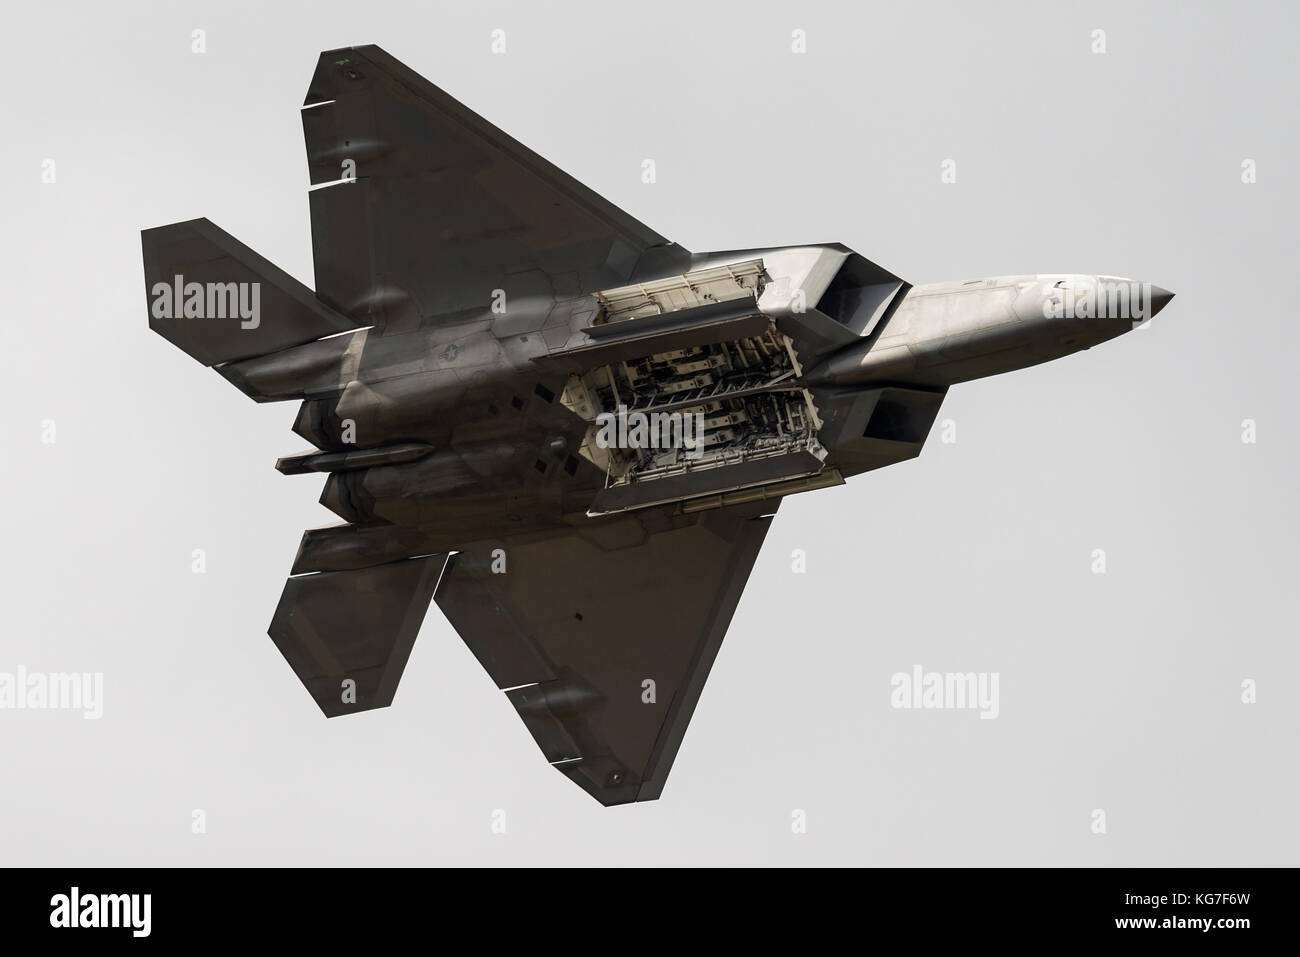 A F-22 Raptor fifth-generation, single-seat, twin-engine, all-weather stealth tactical fighter aircraft developed for the United States Air Force. Stock Photo